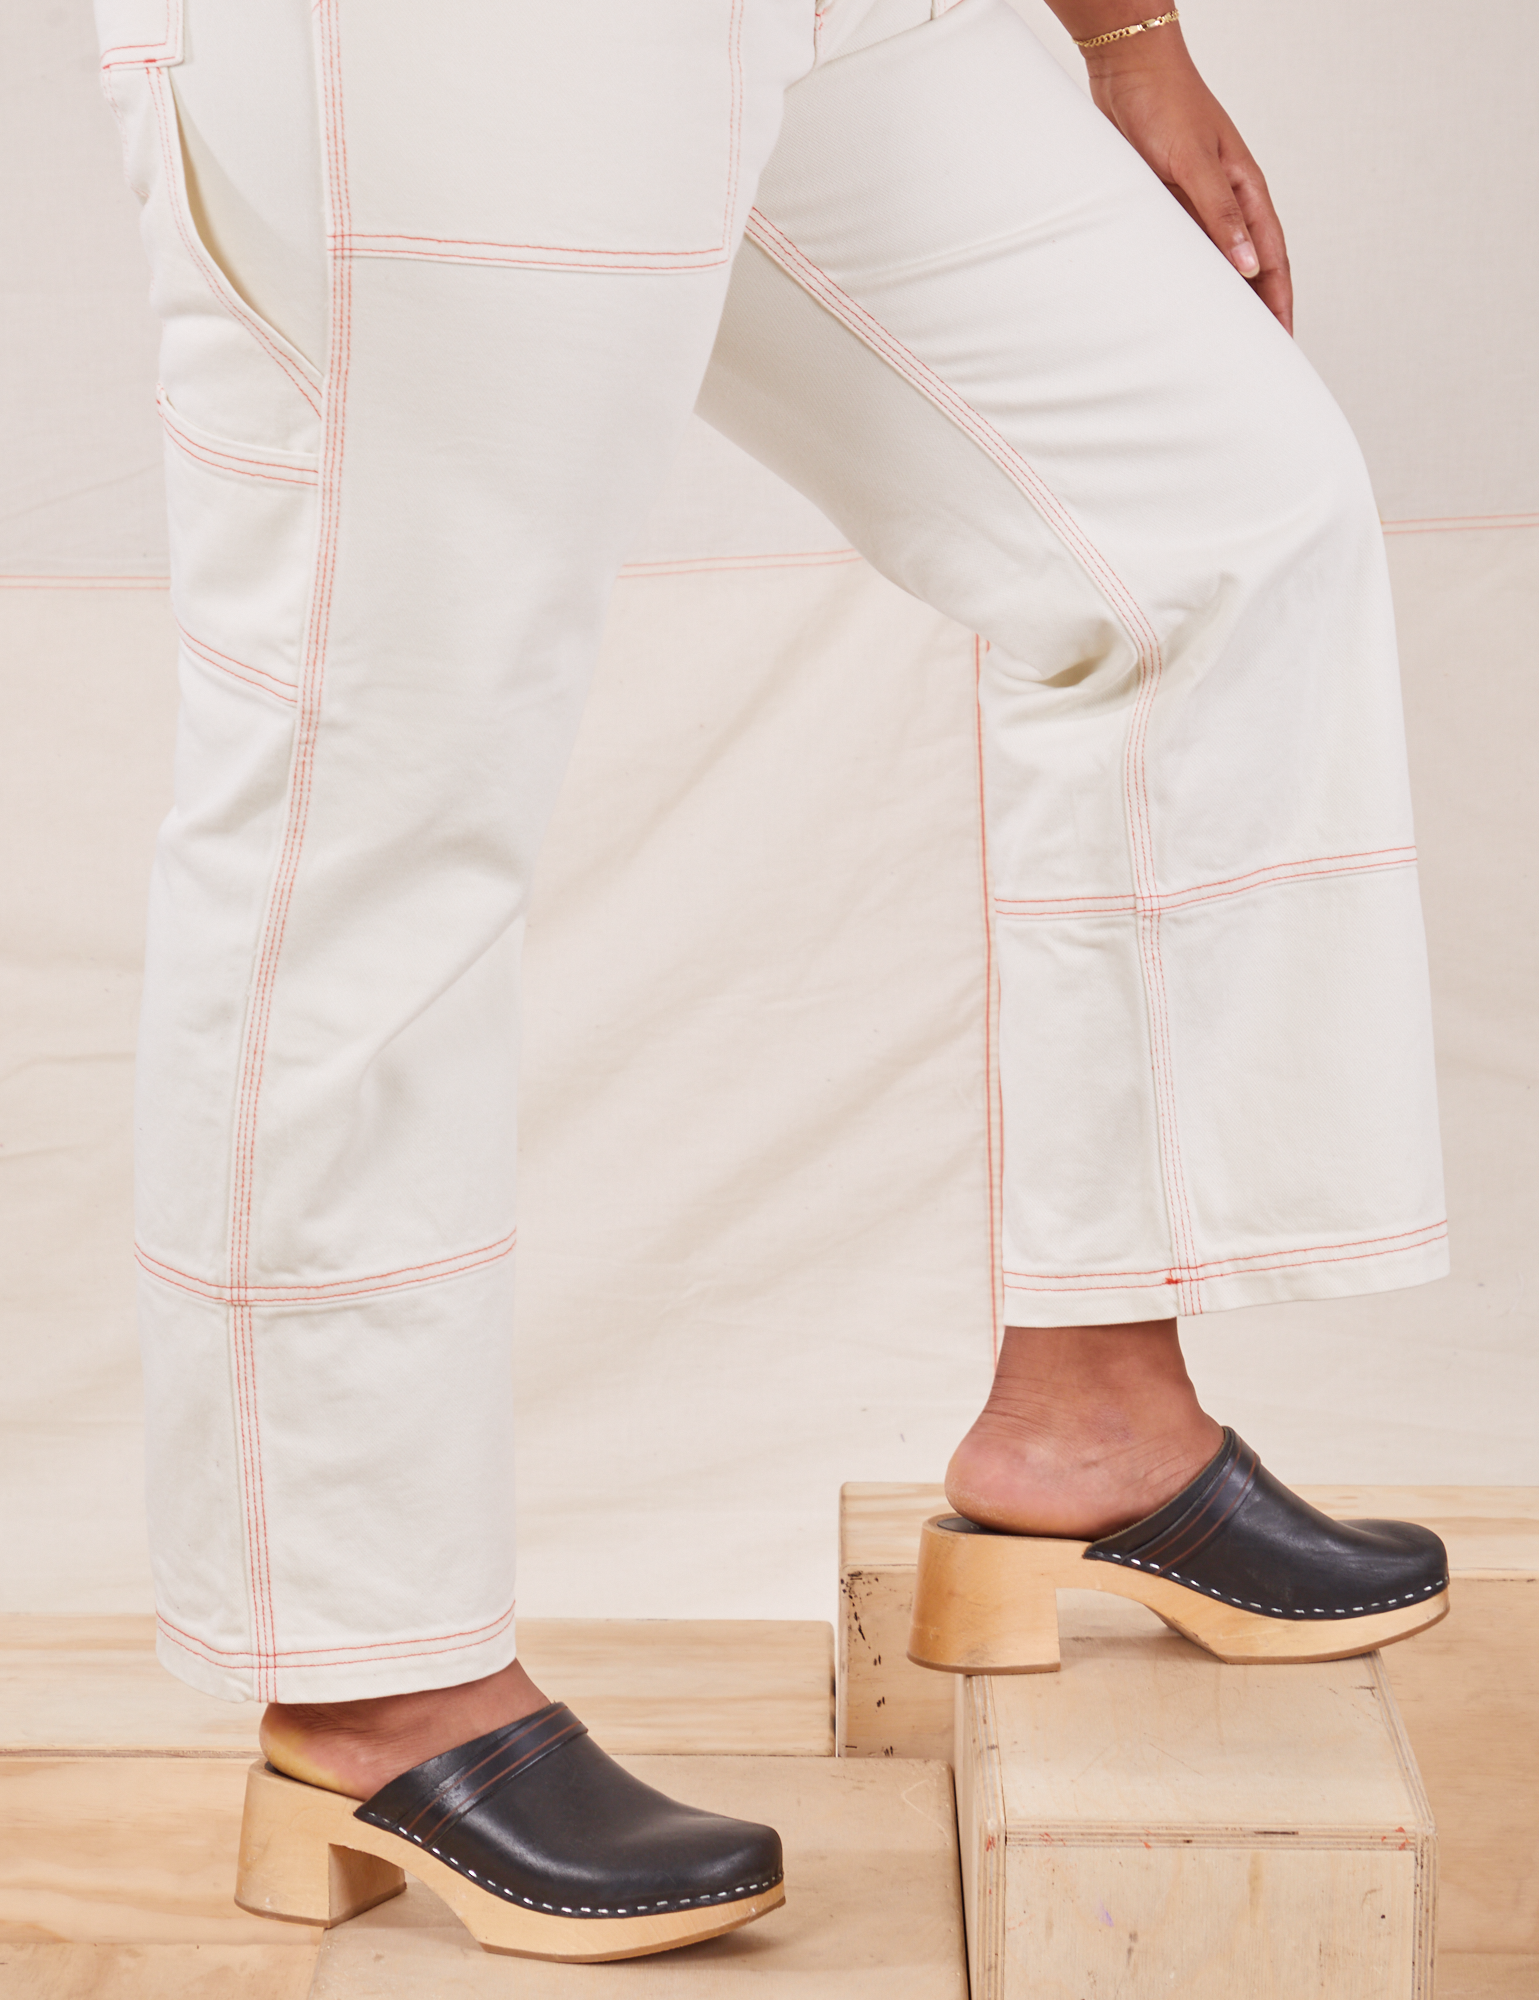 Carpenter Jeans in Vintage Tee Off-White pant side view close up on Meghna